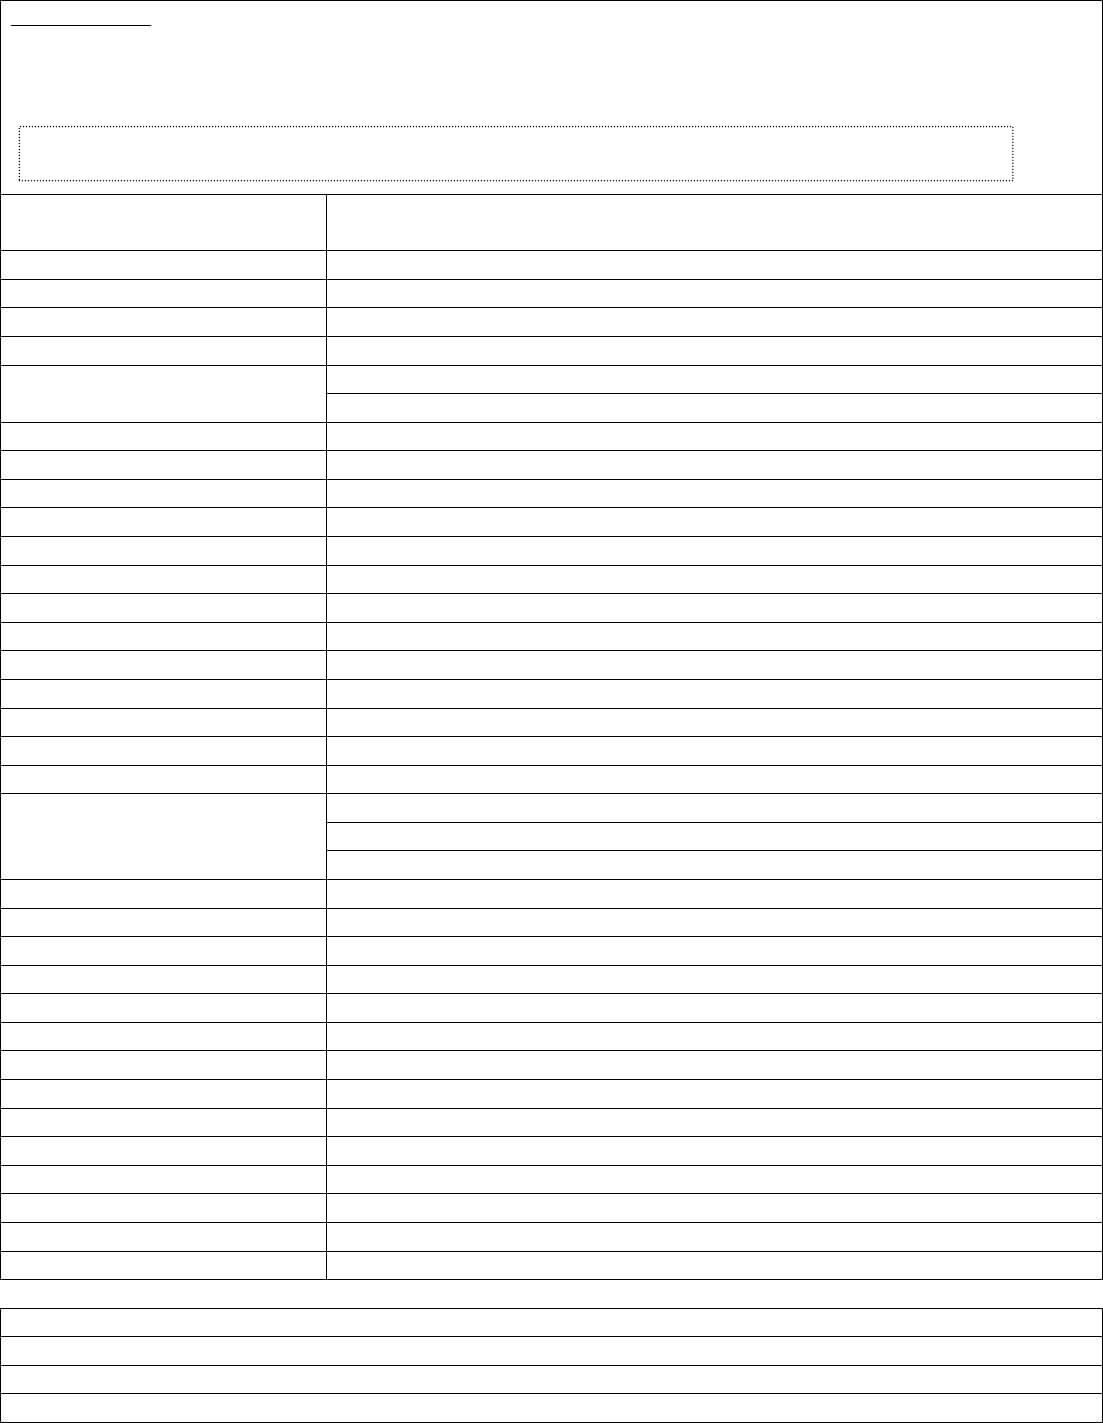 Cornell Notes Template In Word And Pdf Formats In Avid Cornell Notes Template Pdf